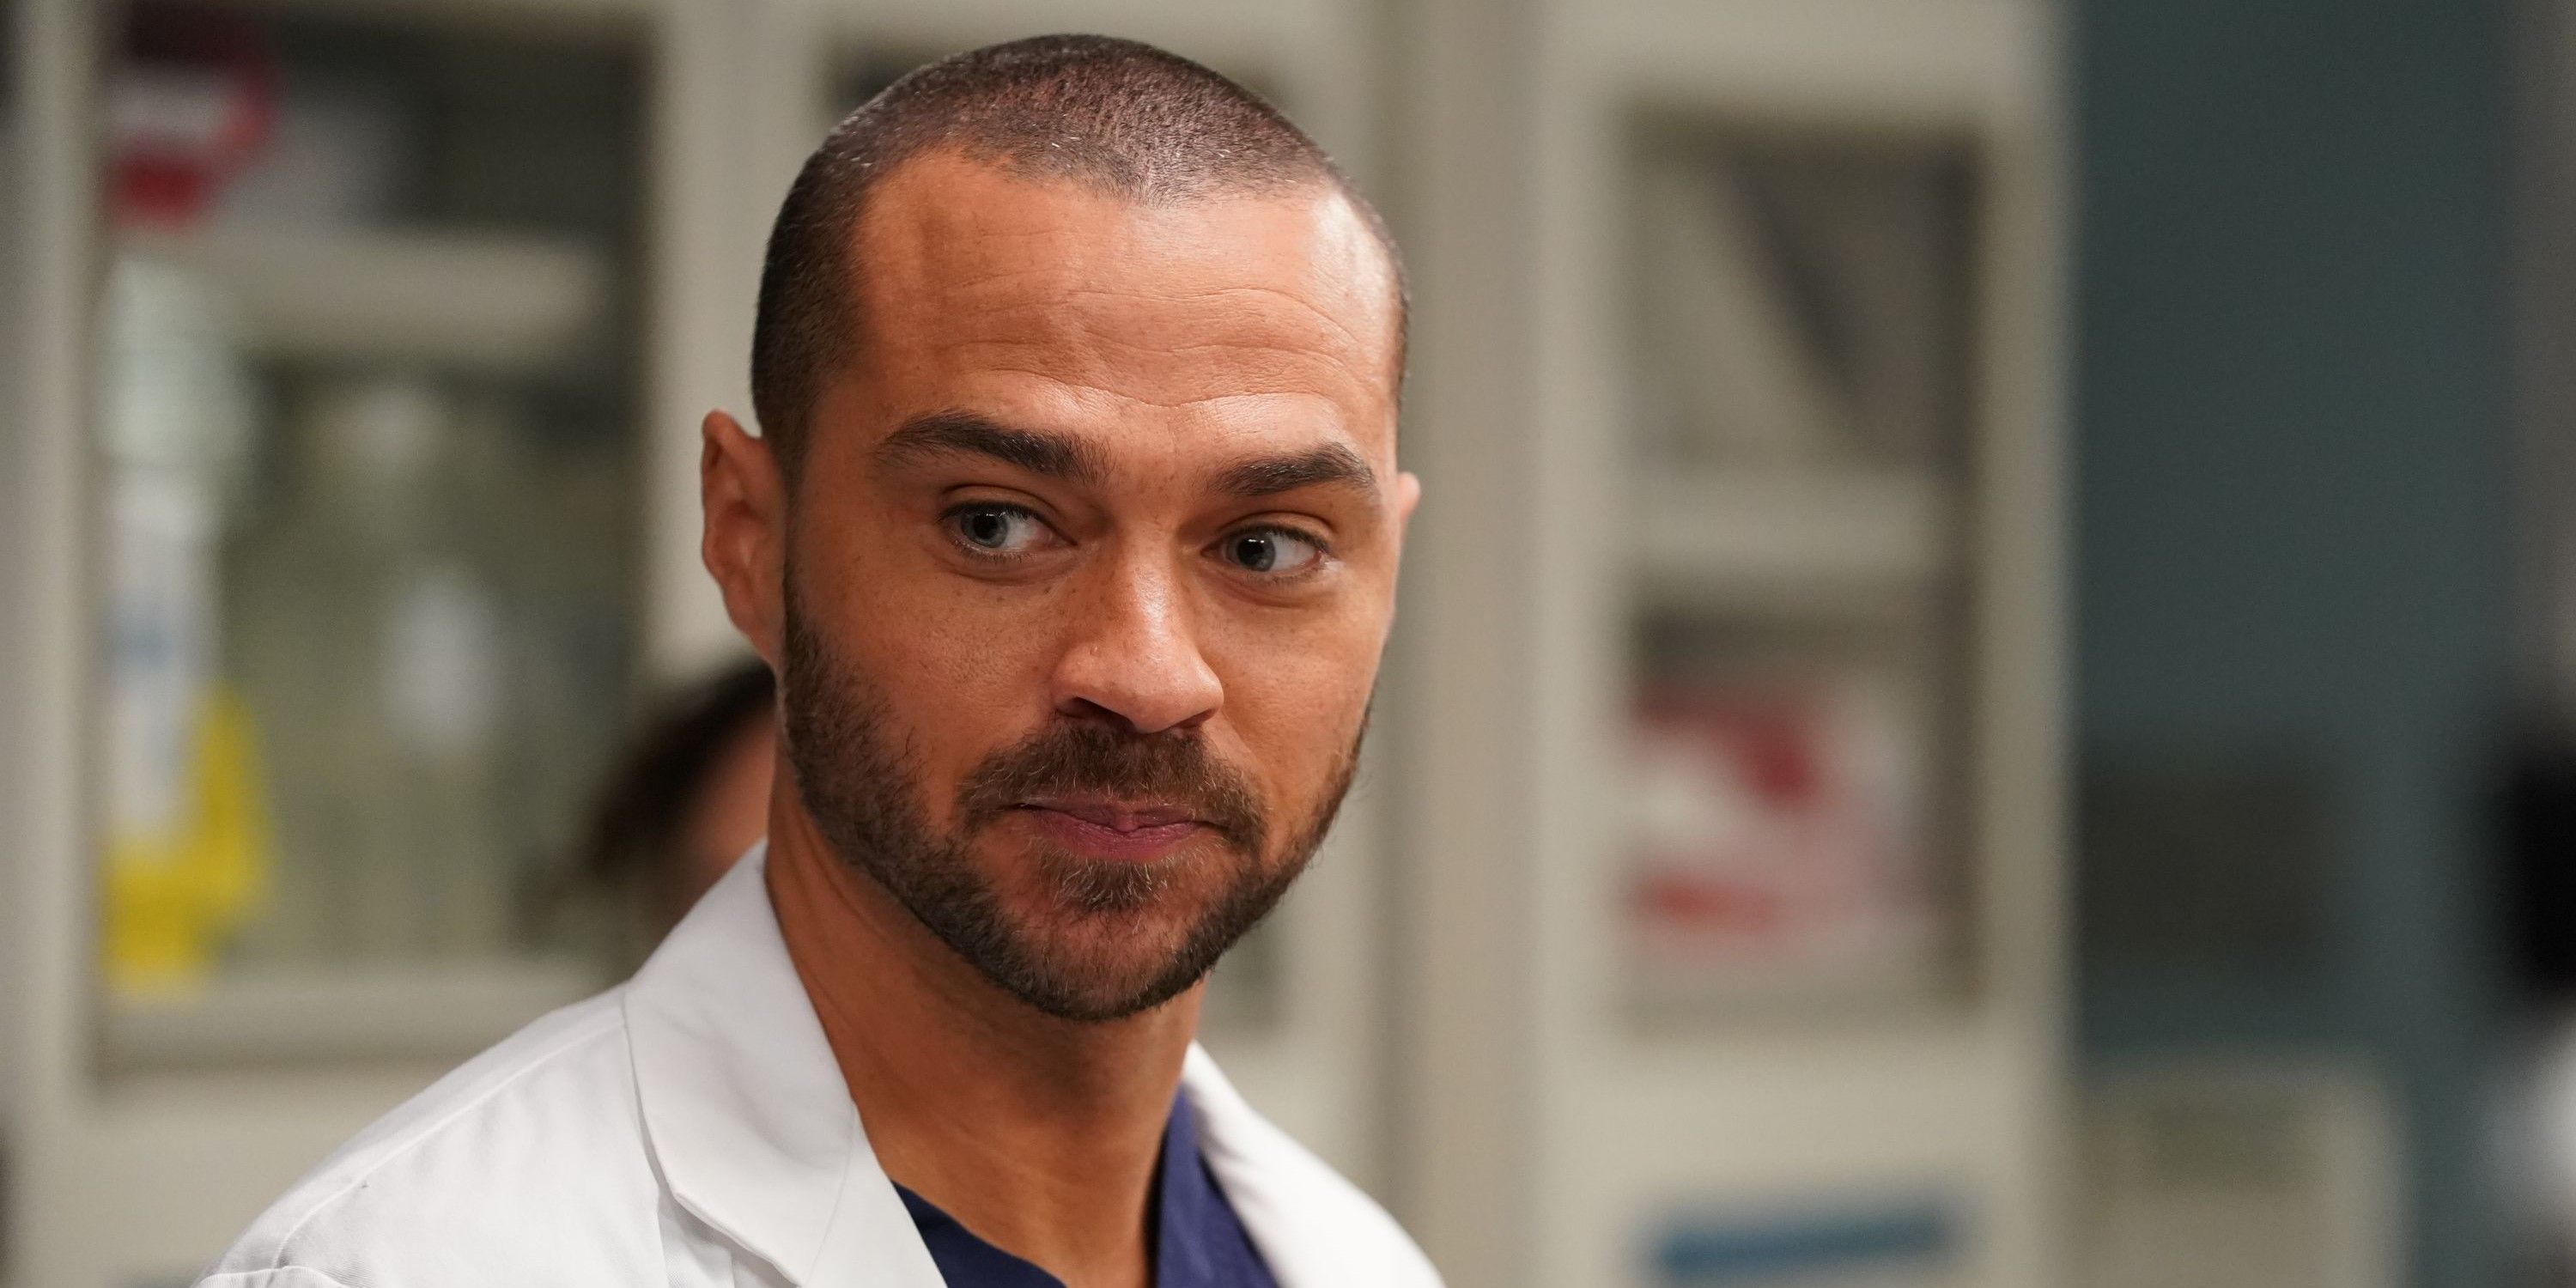 Greys Anatomy The Main Characters Ranked By Power